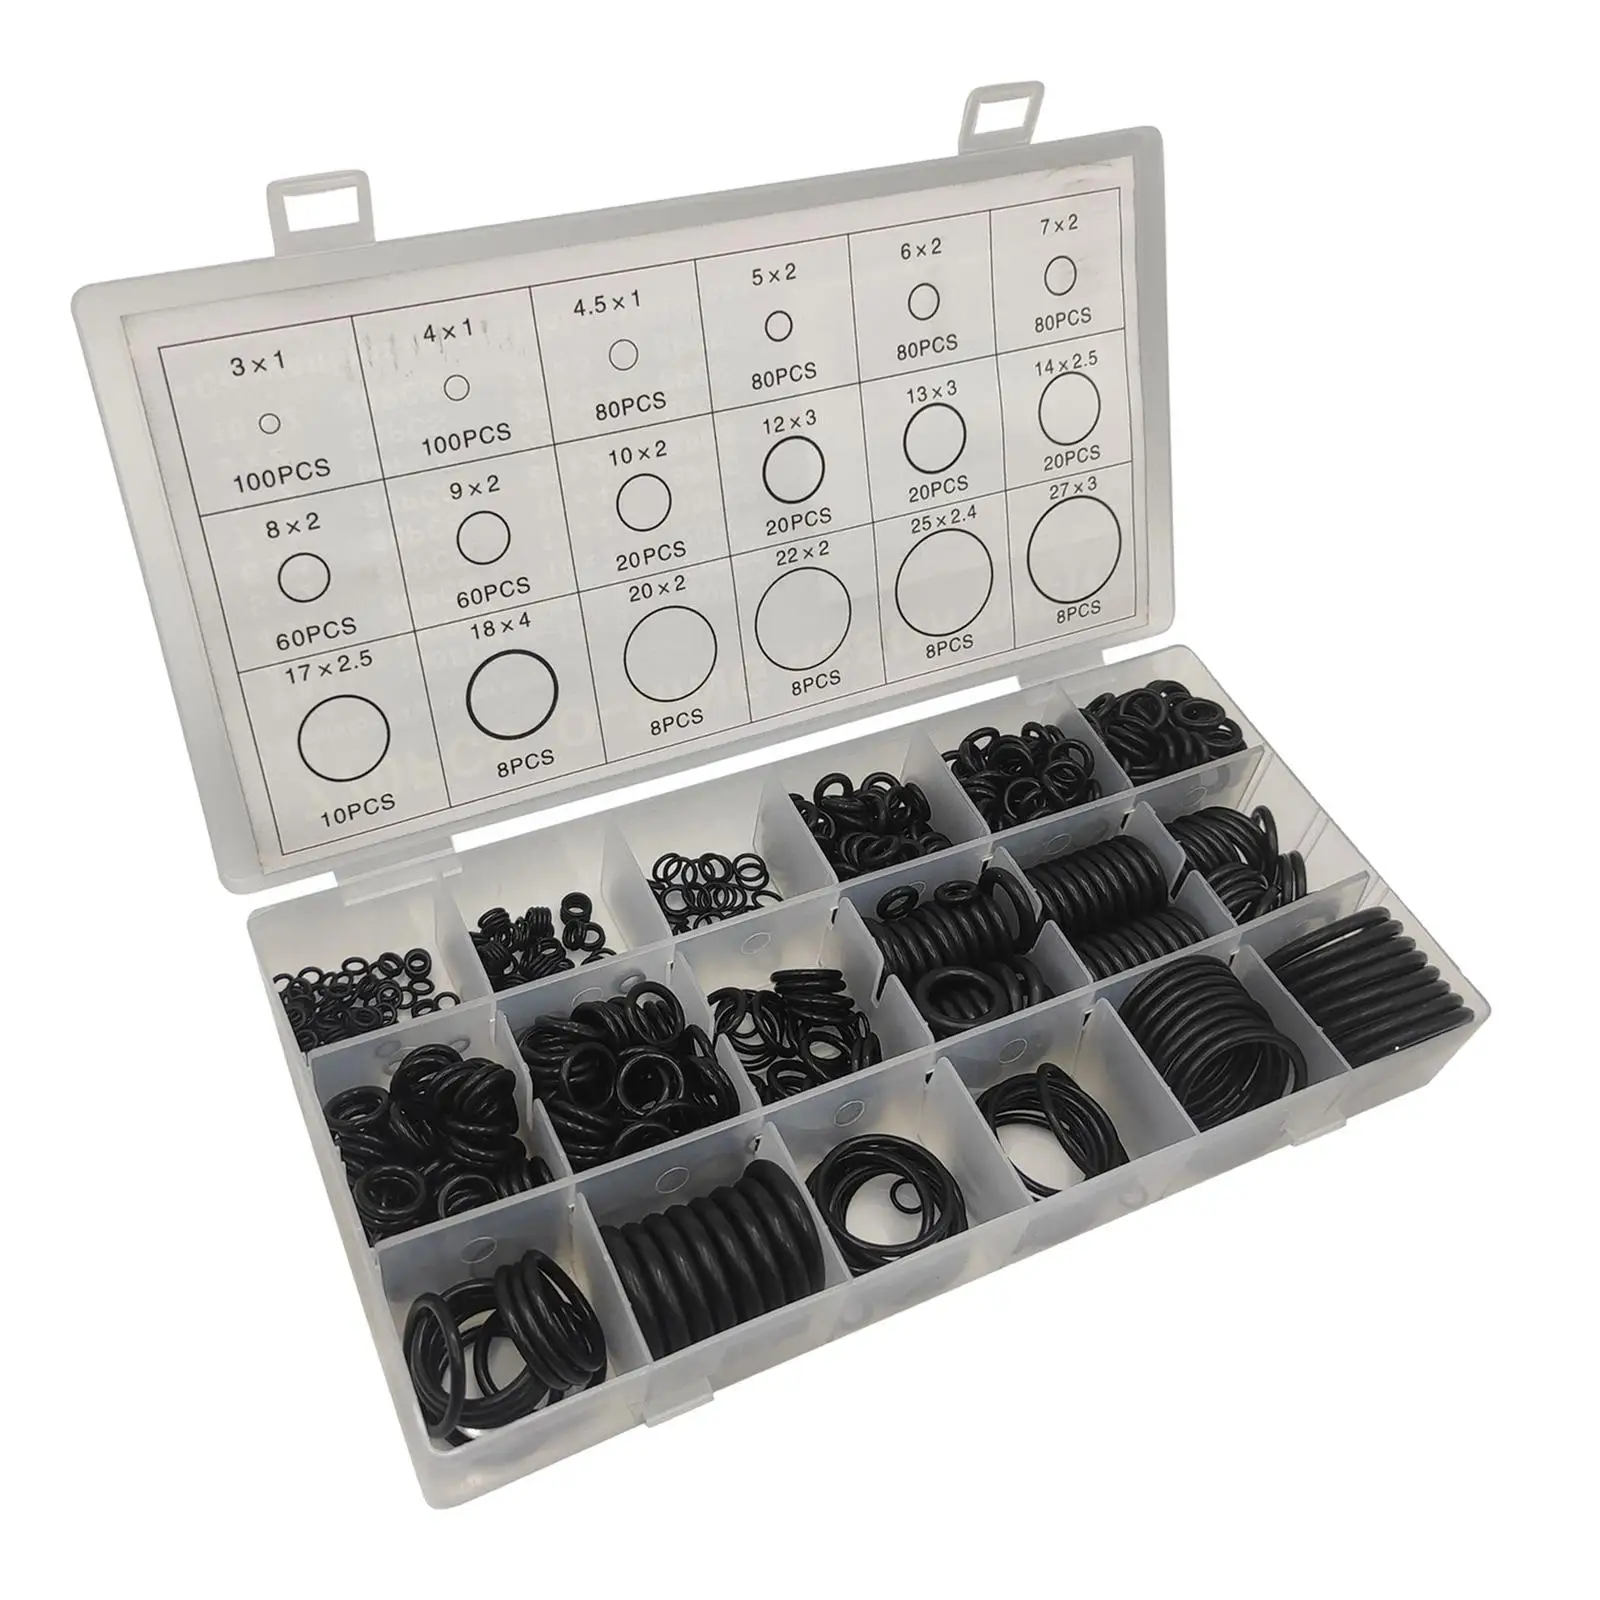 O Rings Assortment kit Black Sealing Gasket Washers for Auto Quick Repair Air or Gas Connections Plumbing Washer Seal